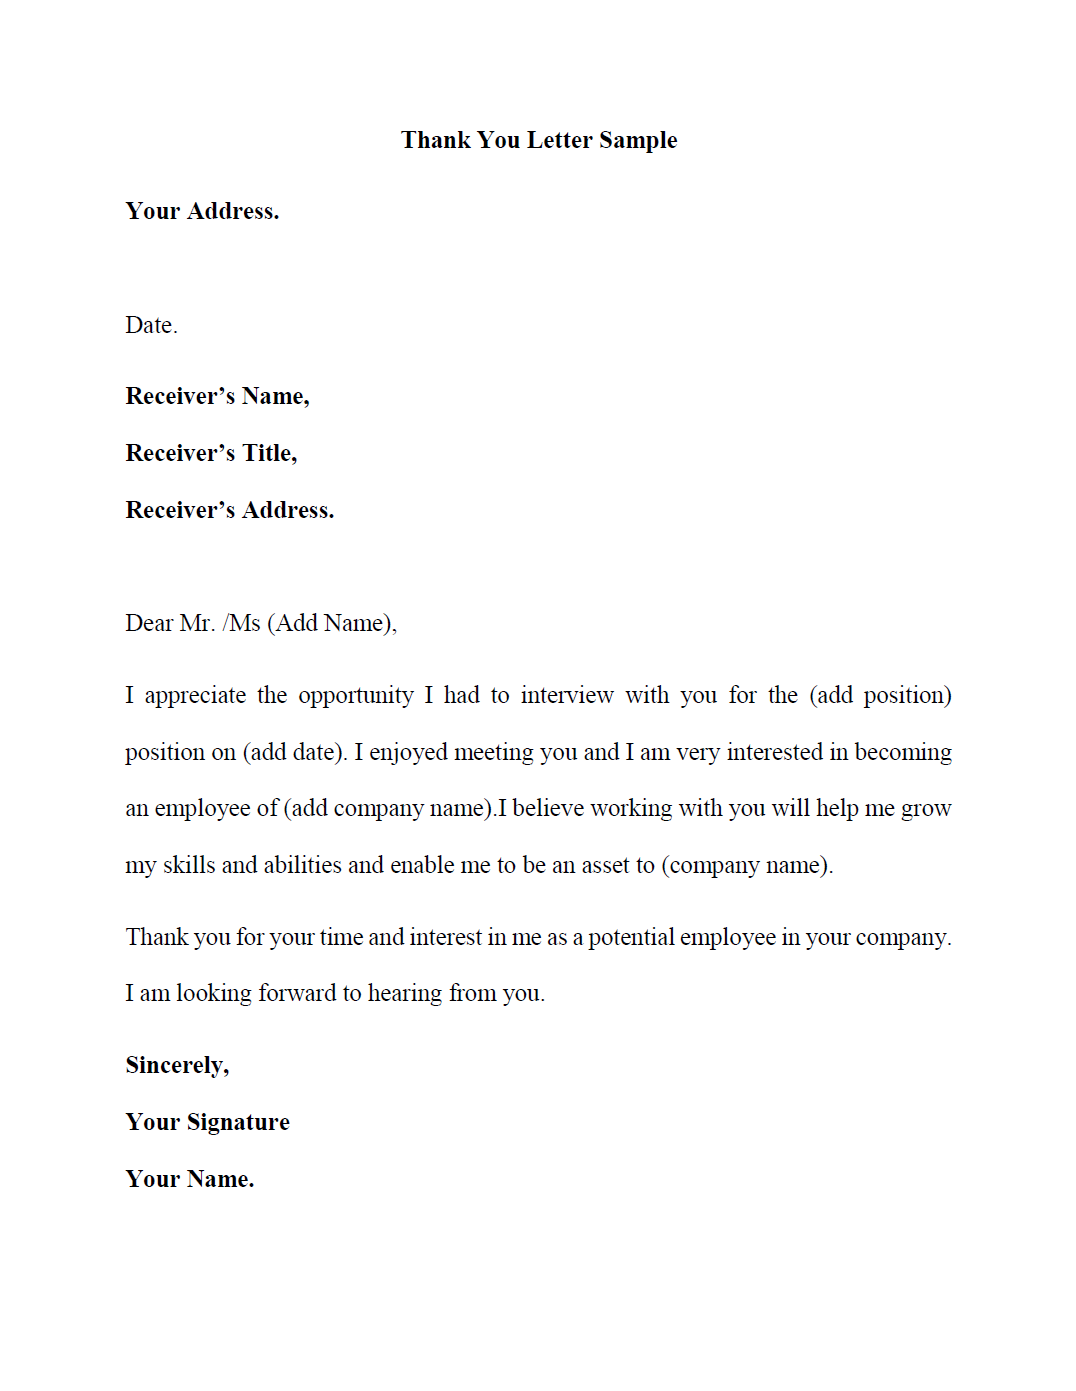 thank you letter sample after interview